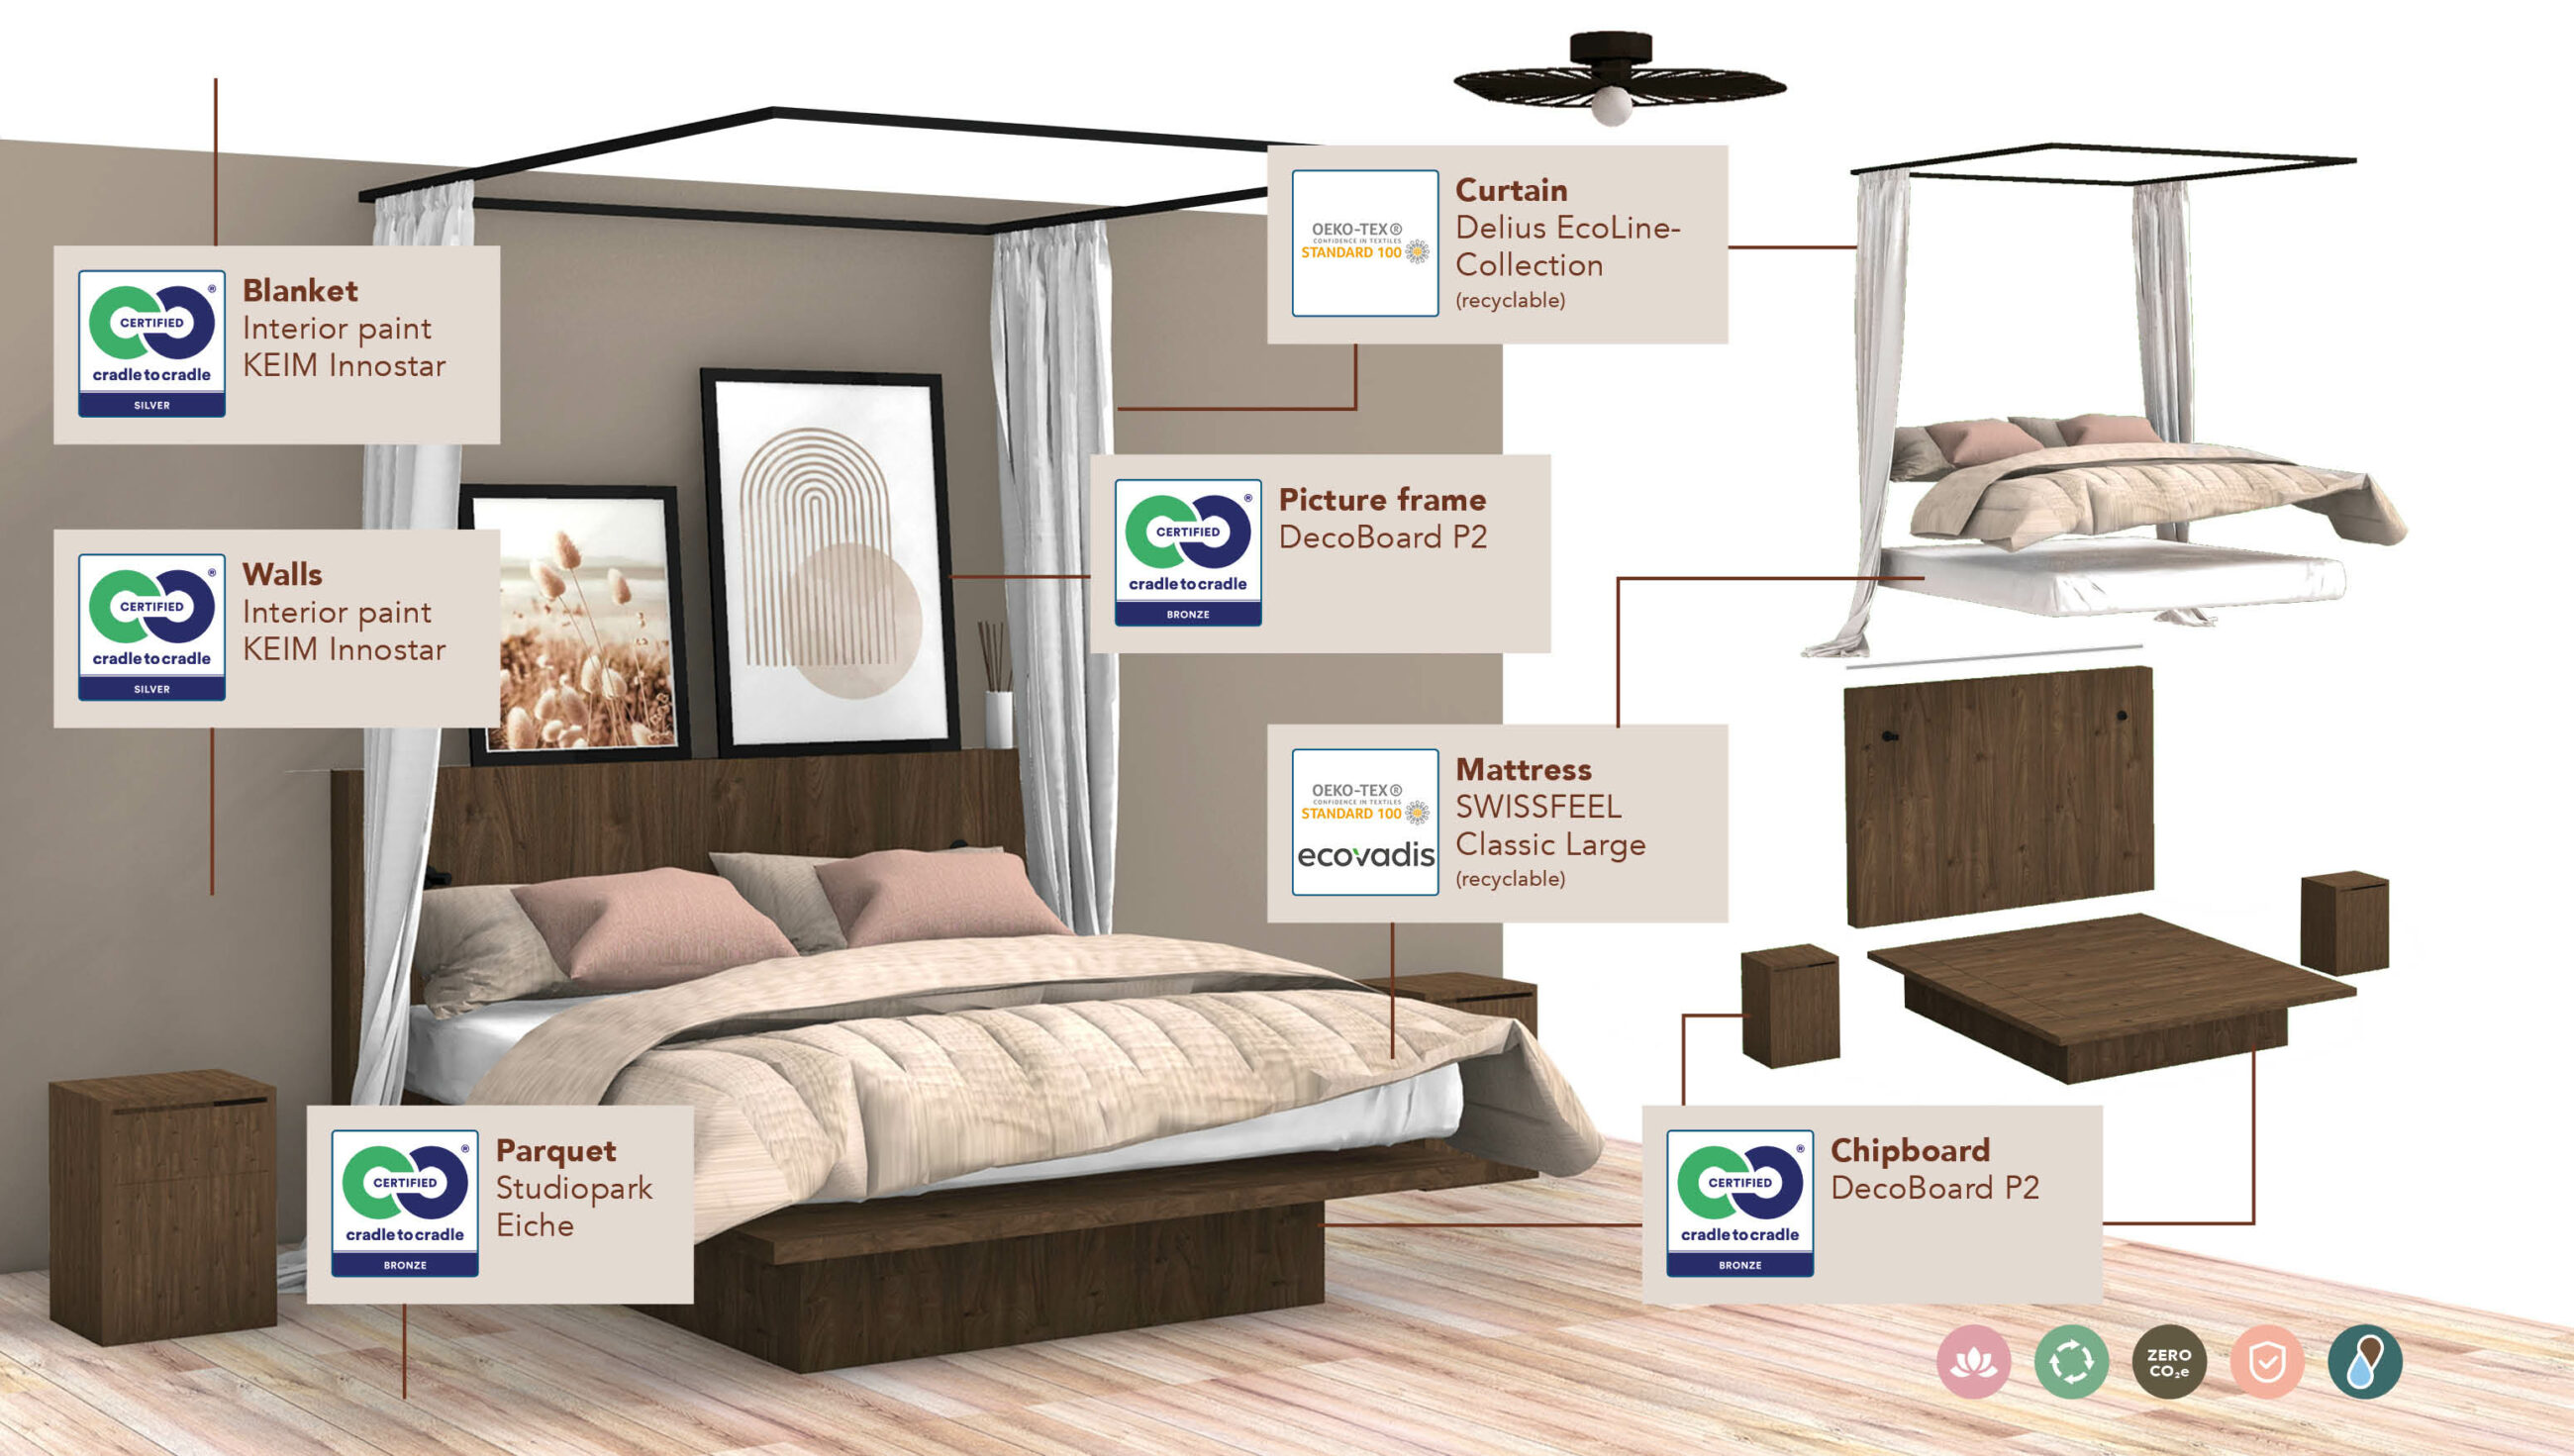 The image shows an exploded graphic of a sustainably designed bedroom interior. It is a detailed representation that highlights different elements of the room, such as the bed, the mattress, the parquet floor, the wall color and the picture frame. Each element is explained by small signs with labels indicating the environmentally friendly certifications, such as "cradle to cradle" and "ÖKO-TEX STANDARD 100". The objects appear to float in the air and are graphically connected to their descriptions by lines to clarify their position and function in space. At the bottom of the image there are icons that symbolize various sustainability aspects such as water saving, CO2 neutrality and recyclability.